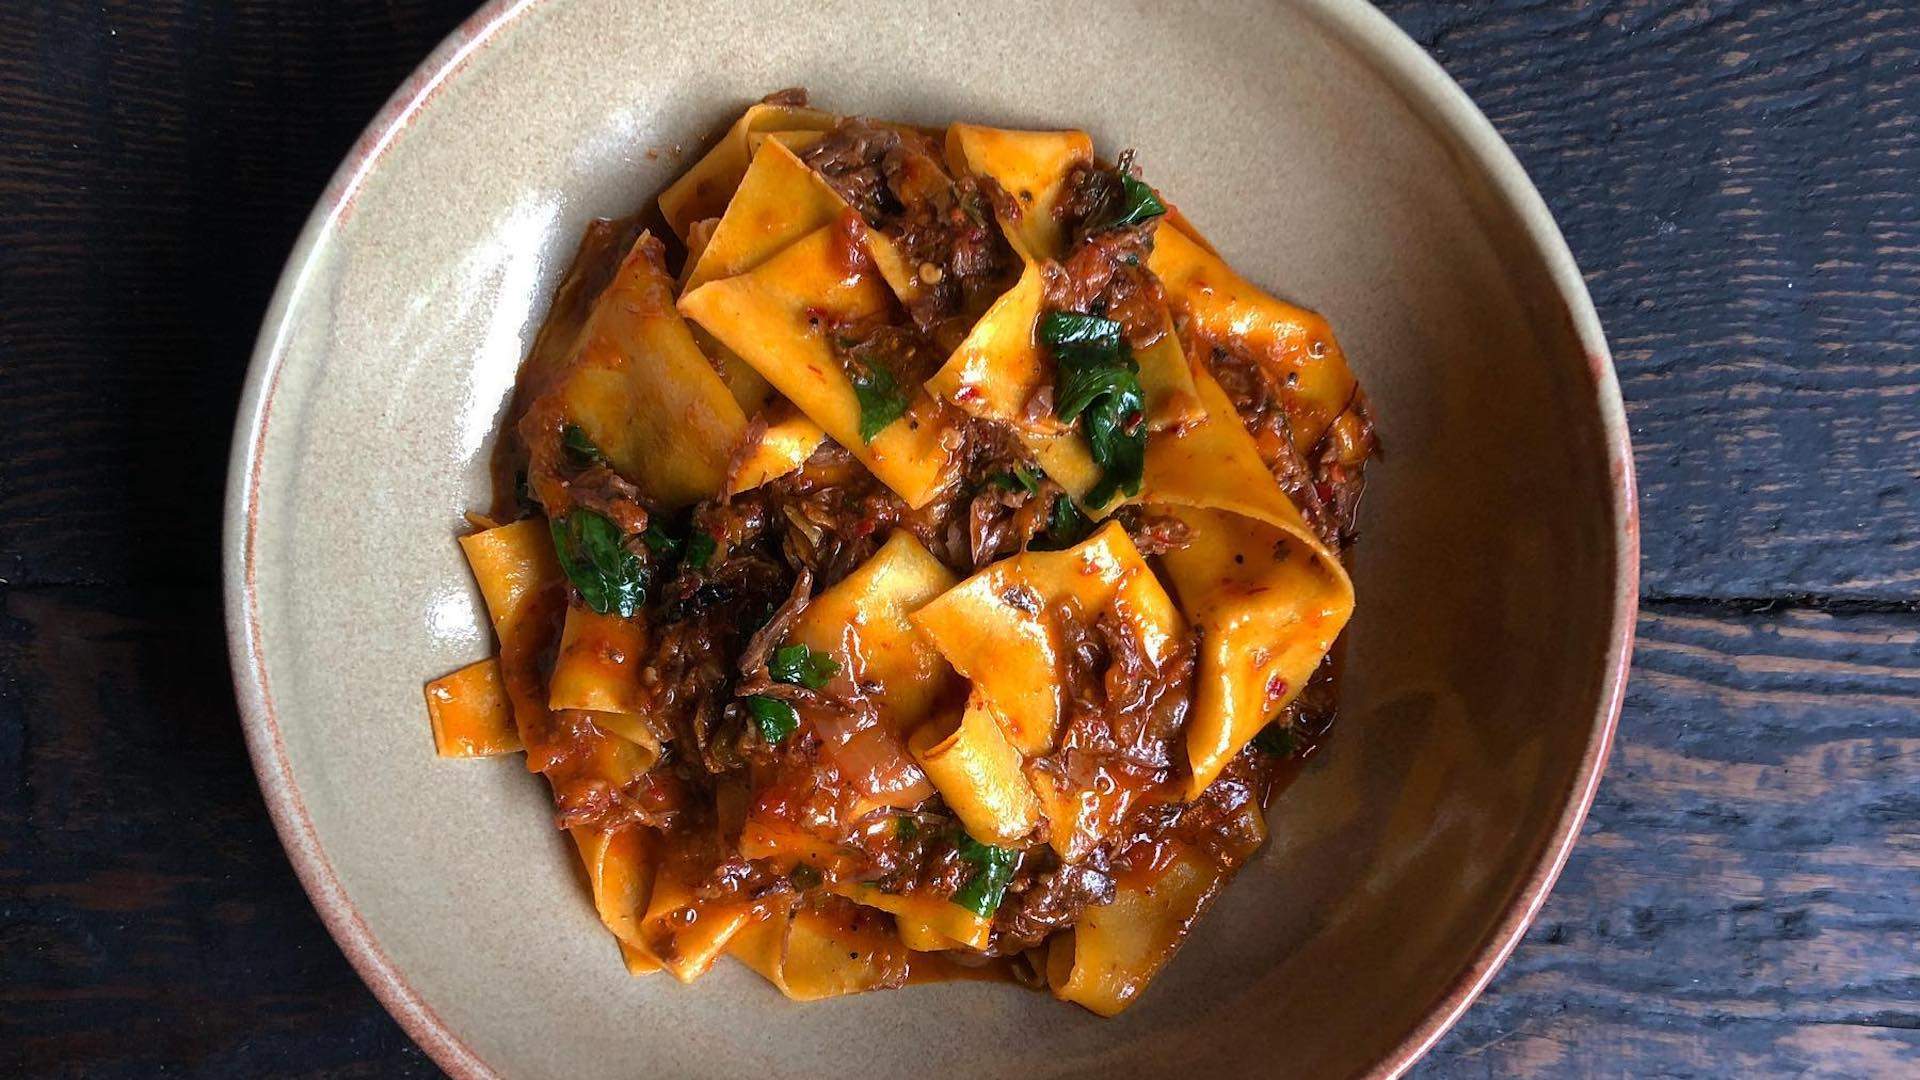 Where to Go in Auckland When All You Want Is a Big Bowl of Pasta